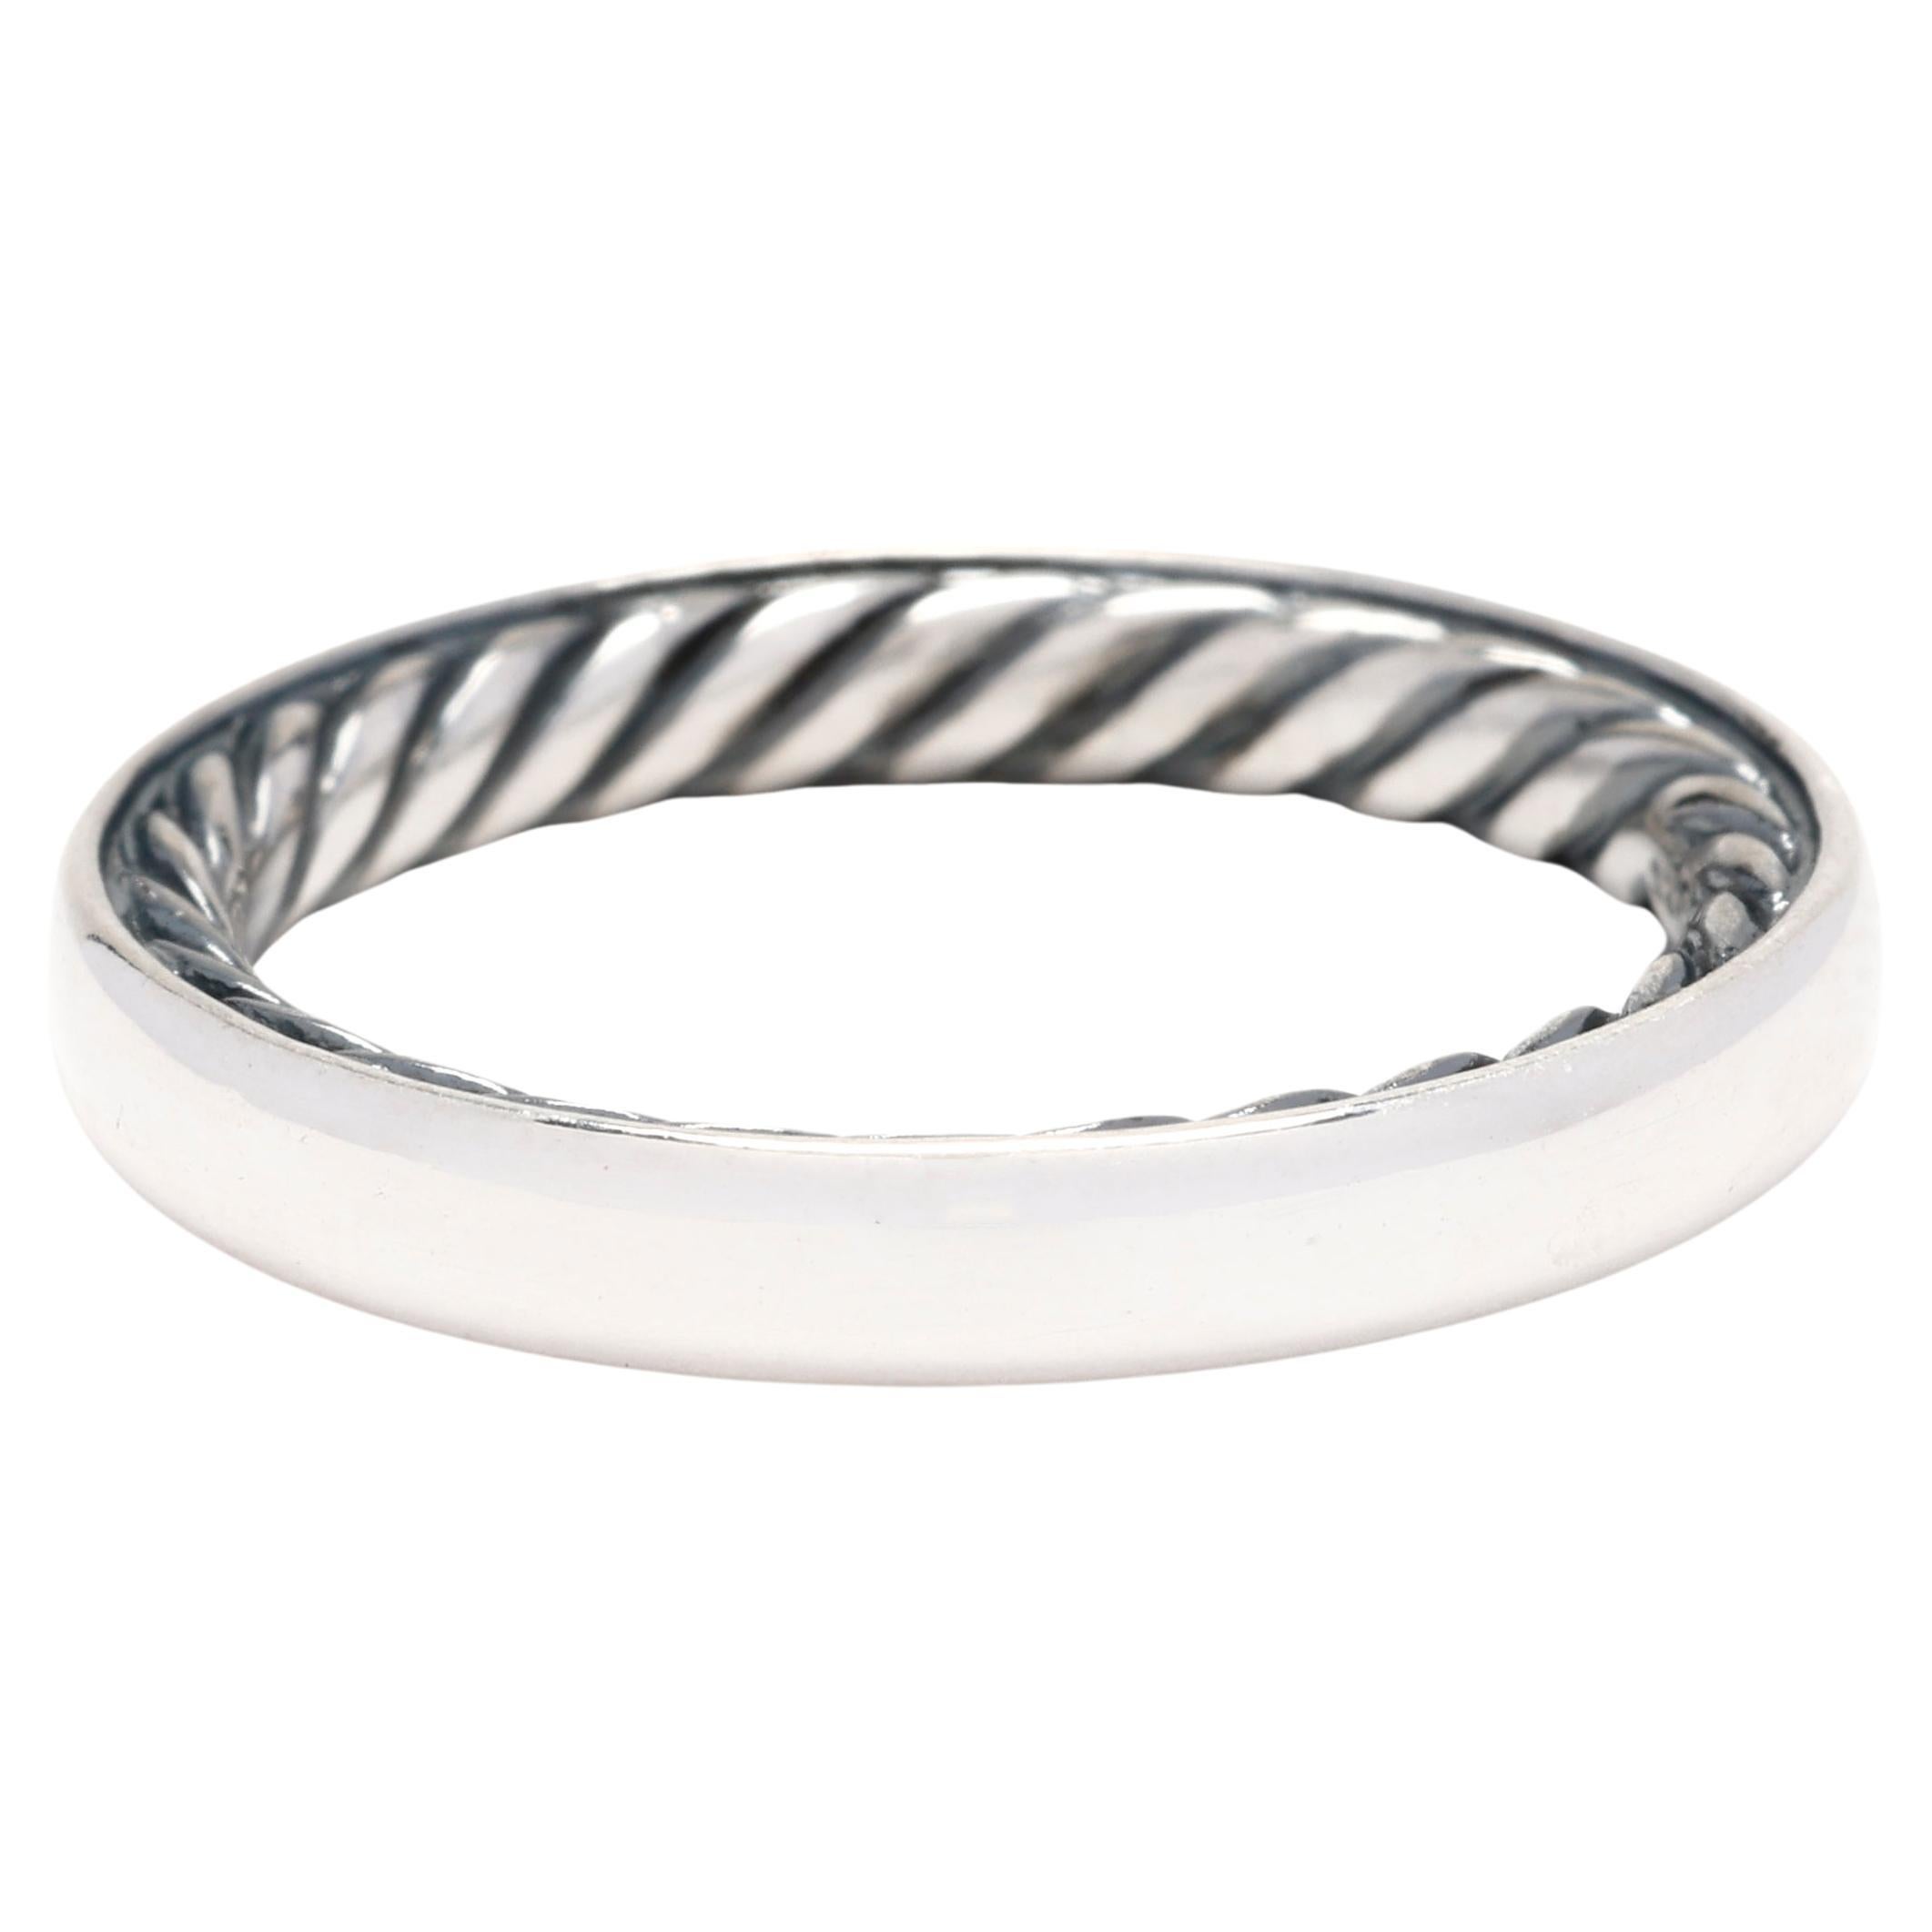 David Yurman Sterling Silver Band Ring, Ring Size 5.75, Inner Twisted Design